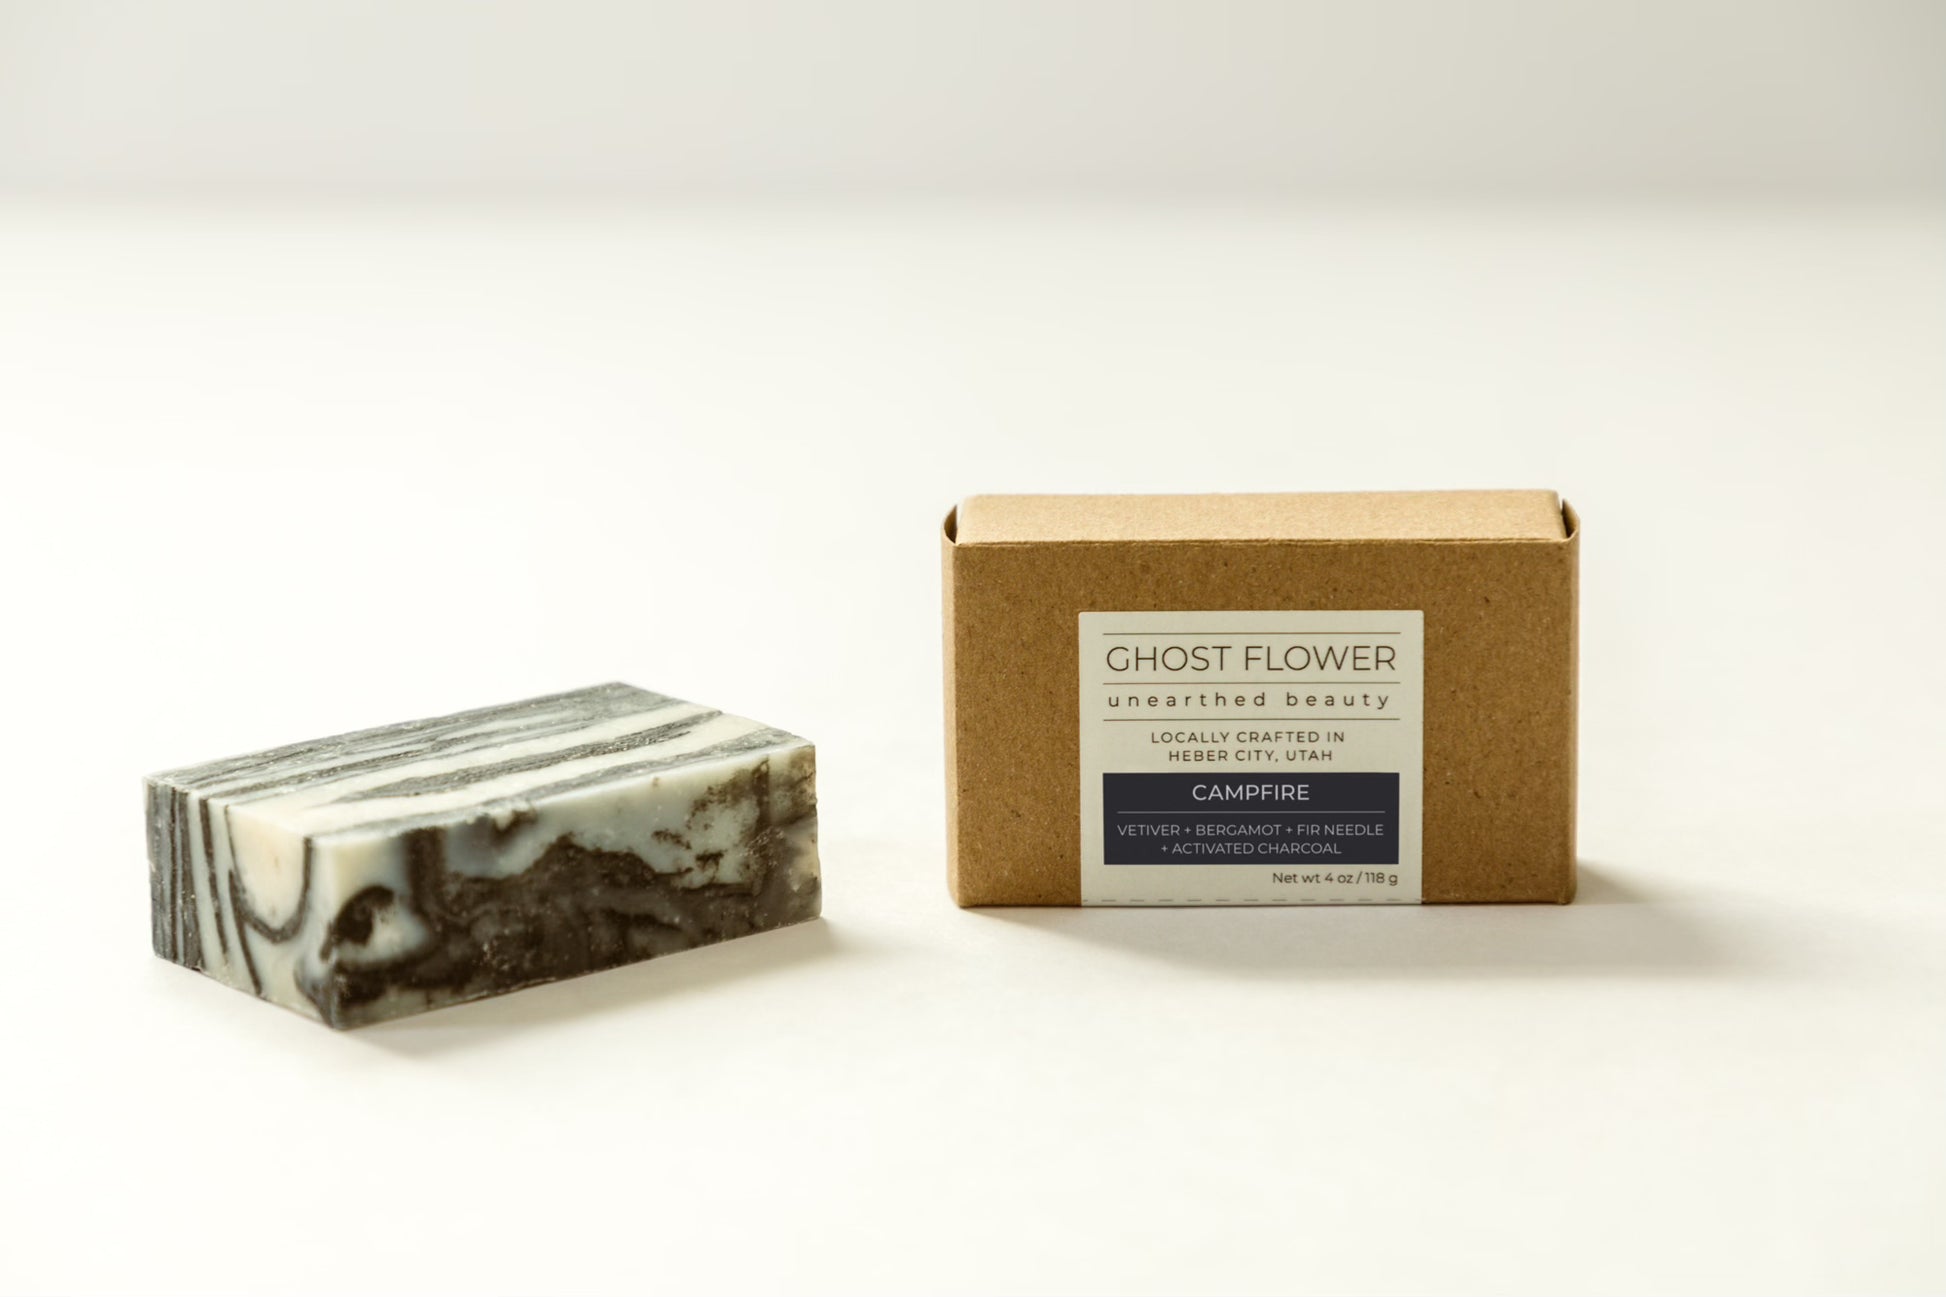 Soap-display-of-handmade-campfire-soap-with-one-single-bar-next-to-it’s-box-ghost-flower-beauty.heic 